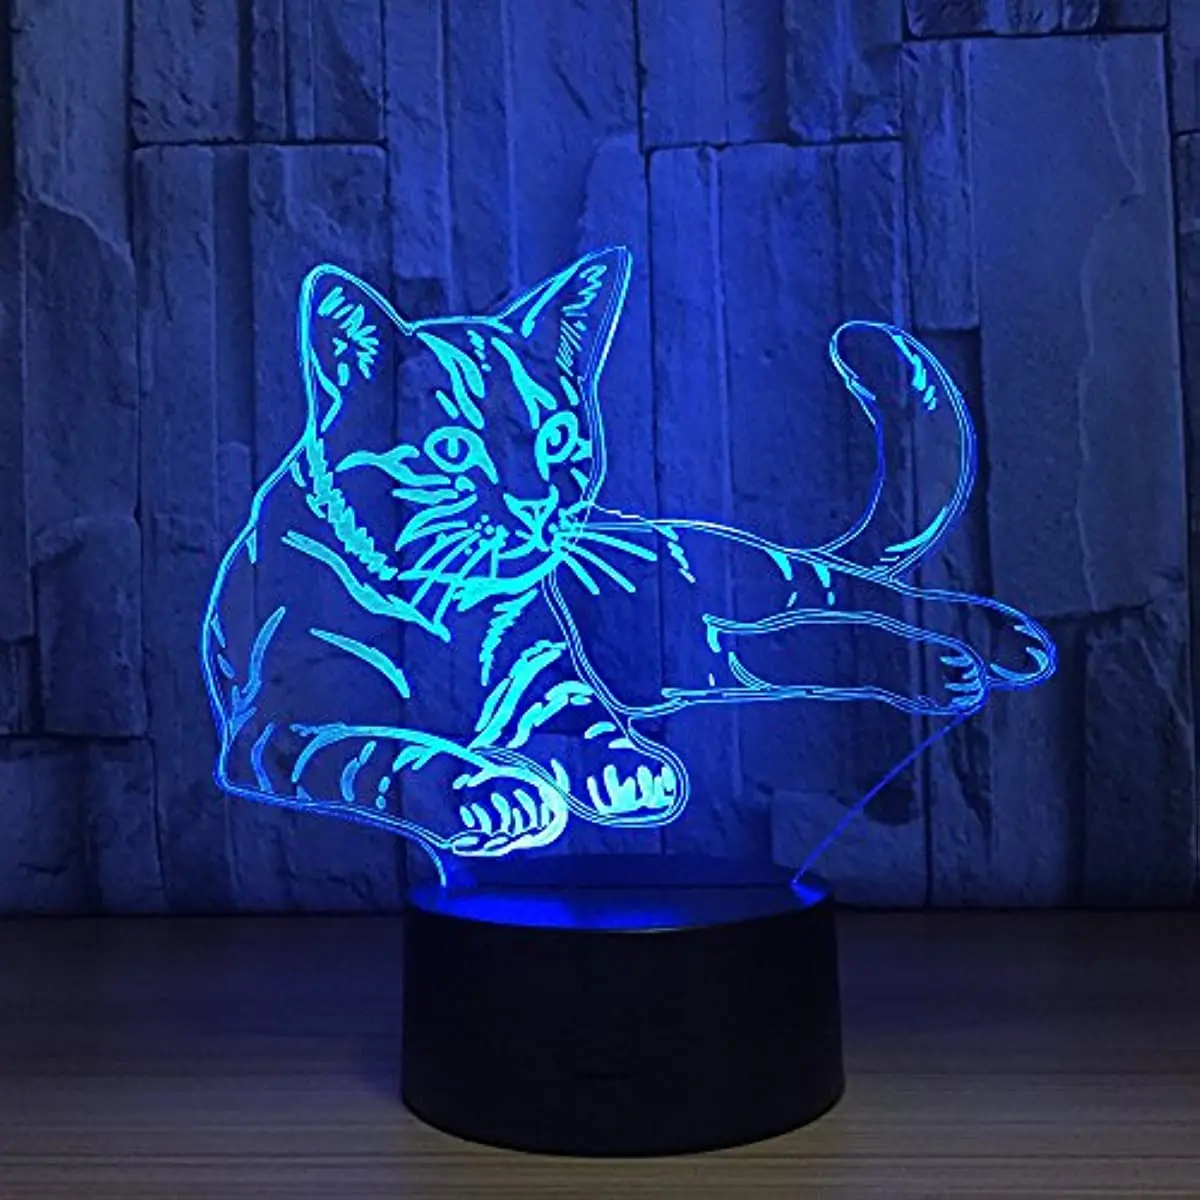 

Nighdn Cat Night Lamp 7 Colour Changing Home Room Decor 3D Visual Illusion LED Table Lamp for Kids Toy Christmas Birthday Gifts